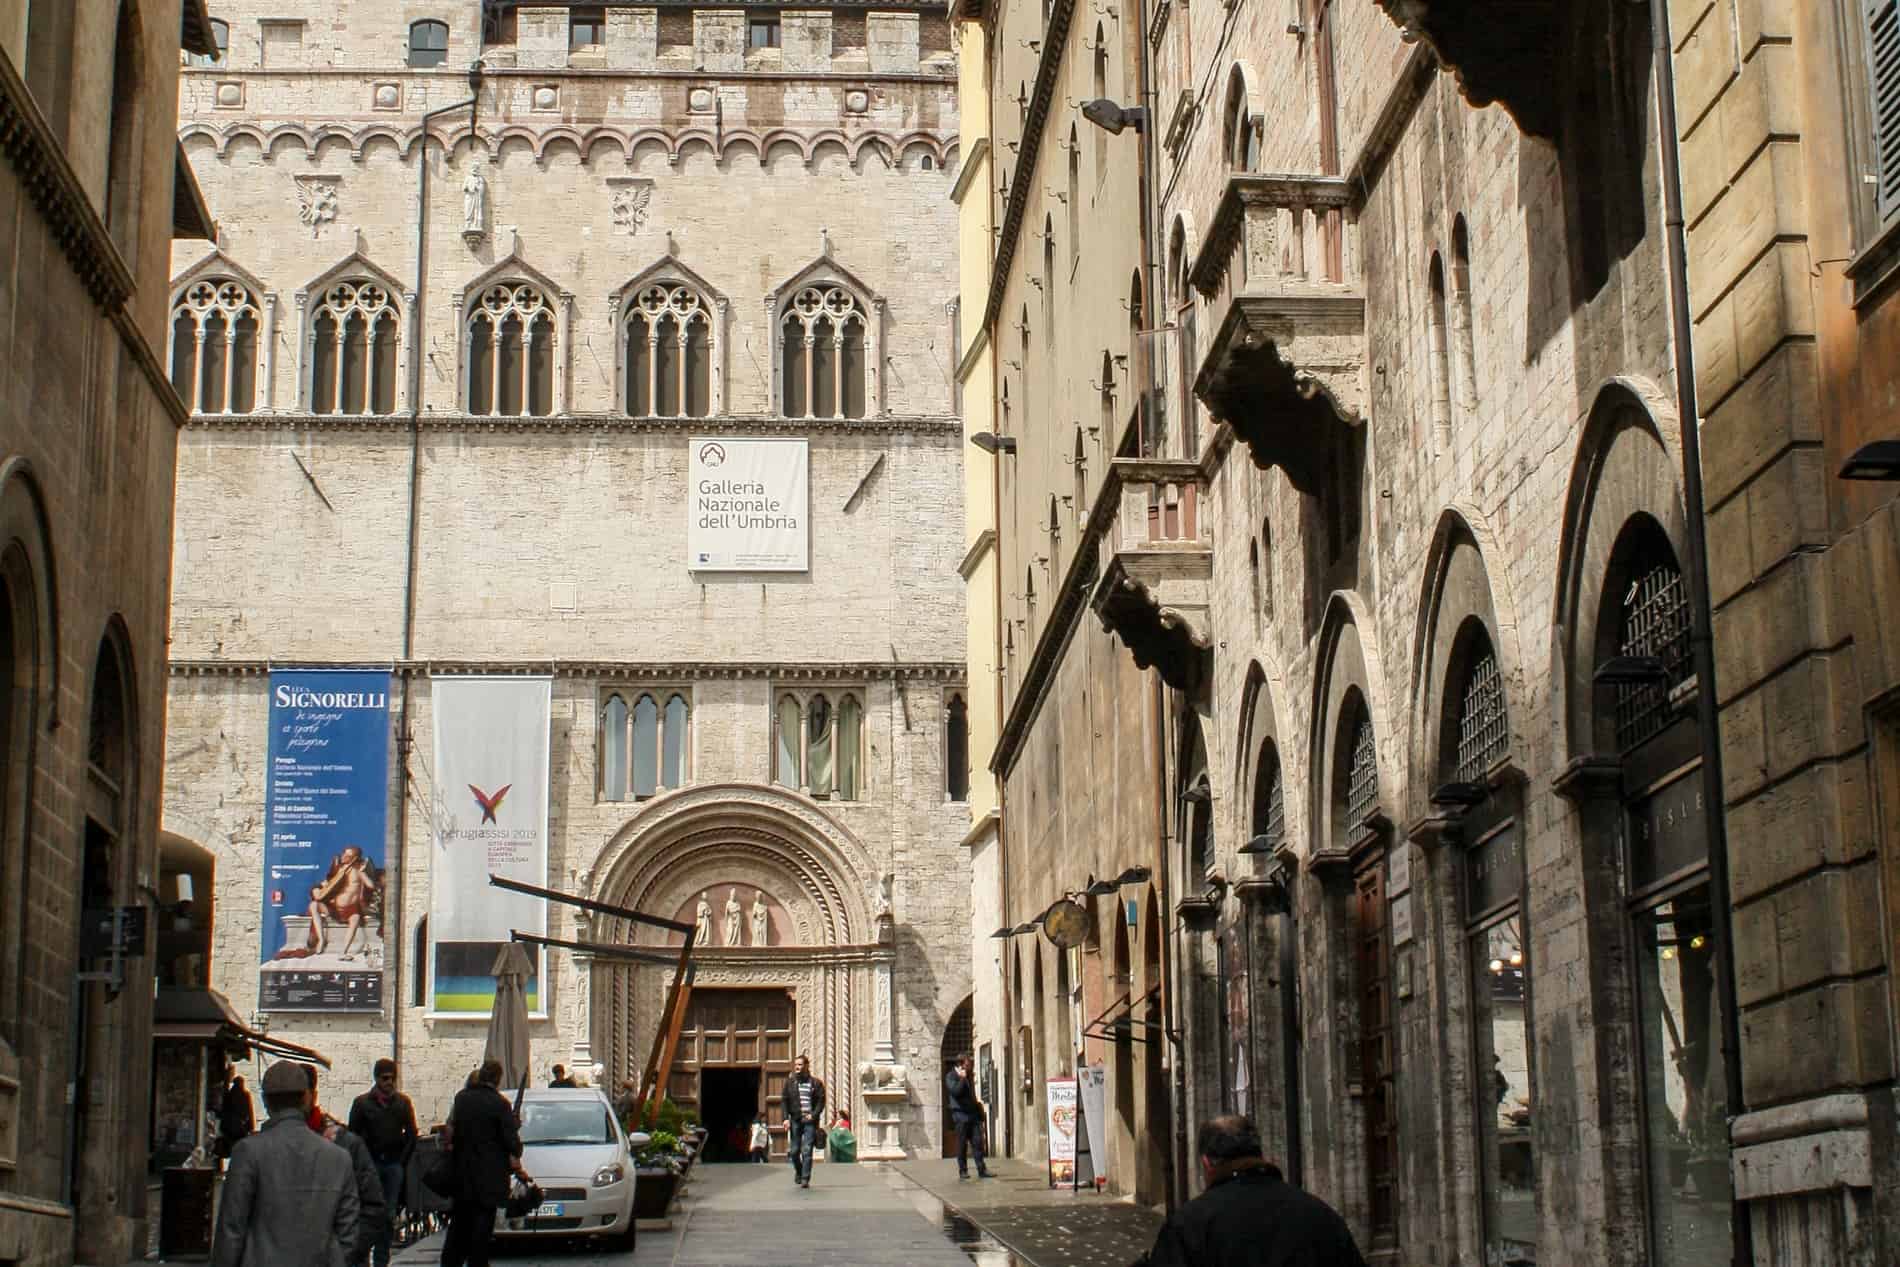 A street of light golden stone structures leading to the gothic building with a textile sign for the Galleria Nazionale dell'Umbria (The National Gallery of Umbria).